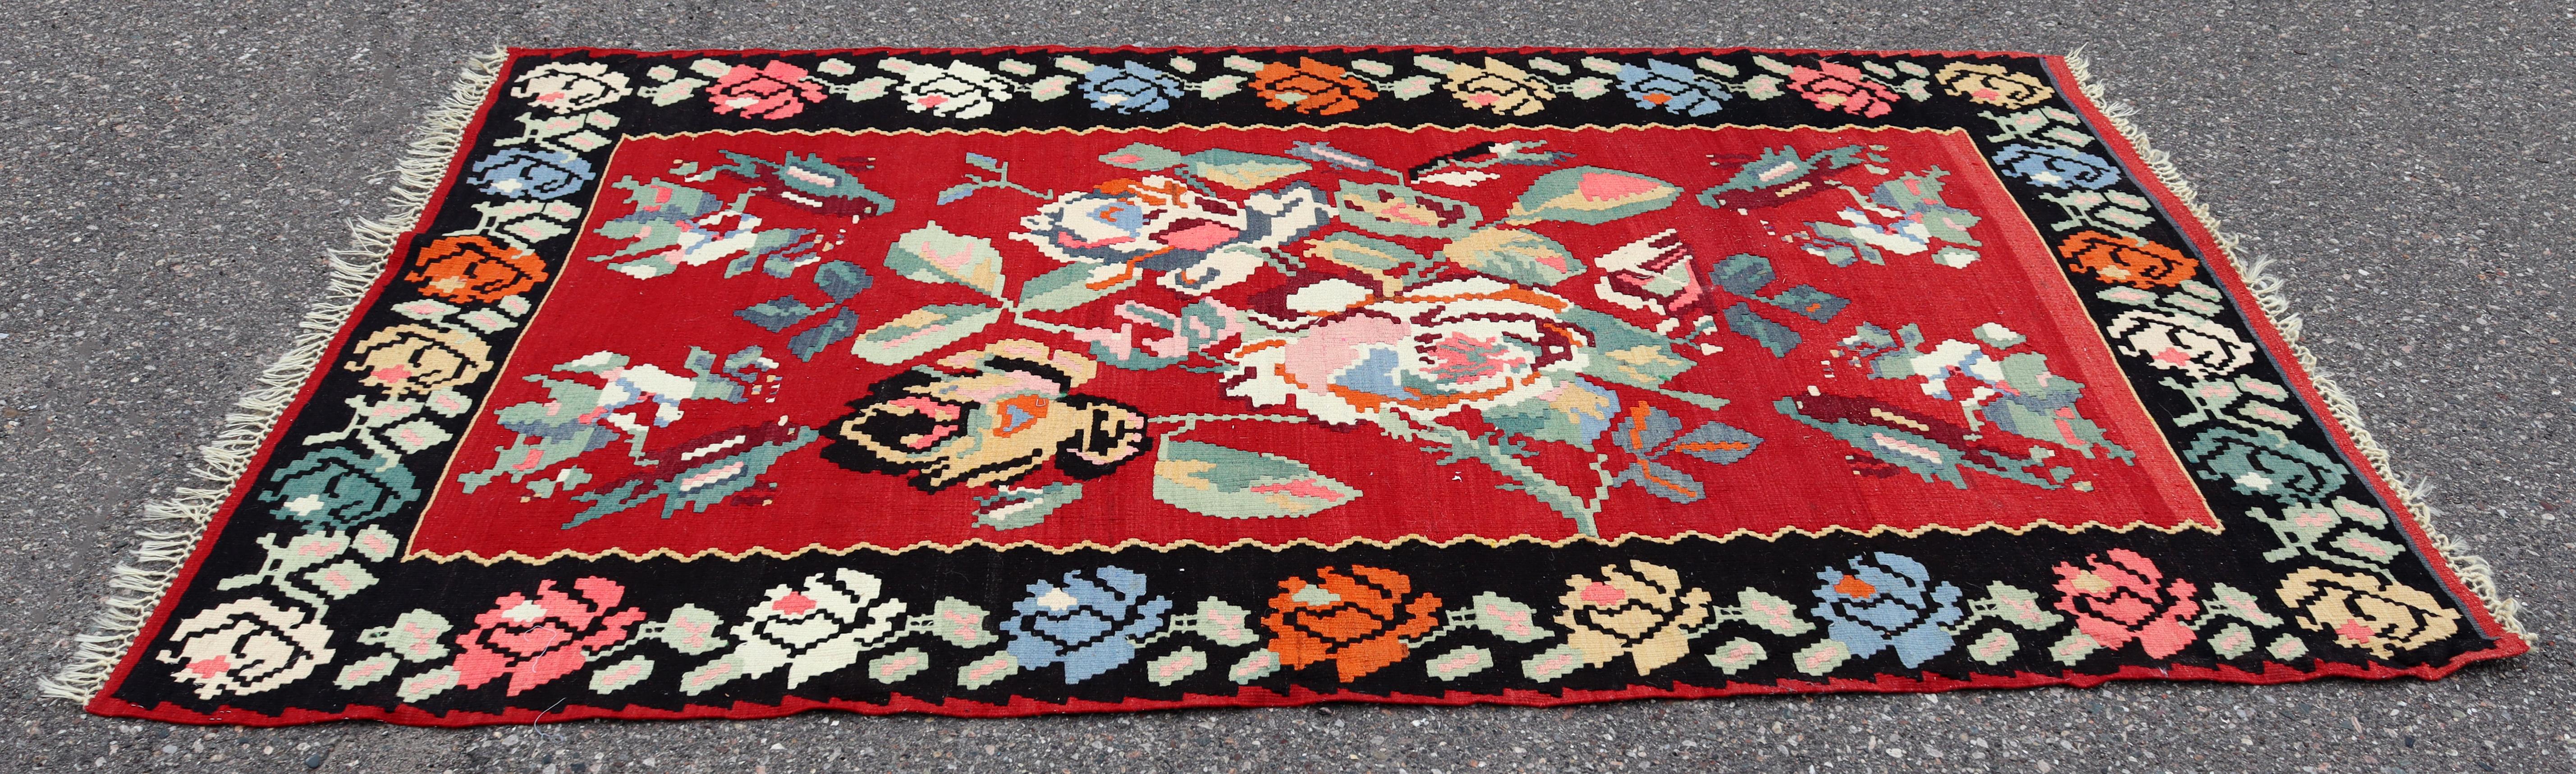 For your consideration is a gorgeous Kilim wool area rug or carpet, hand made in Turkey. In very good vintage condition. The dimensions are 59